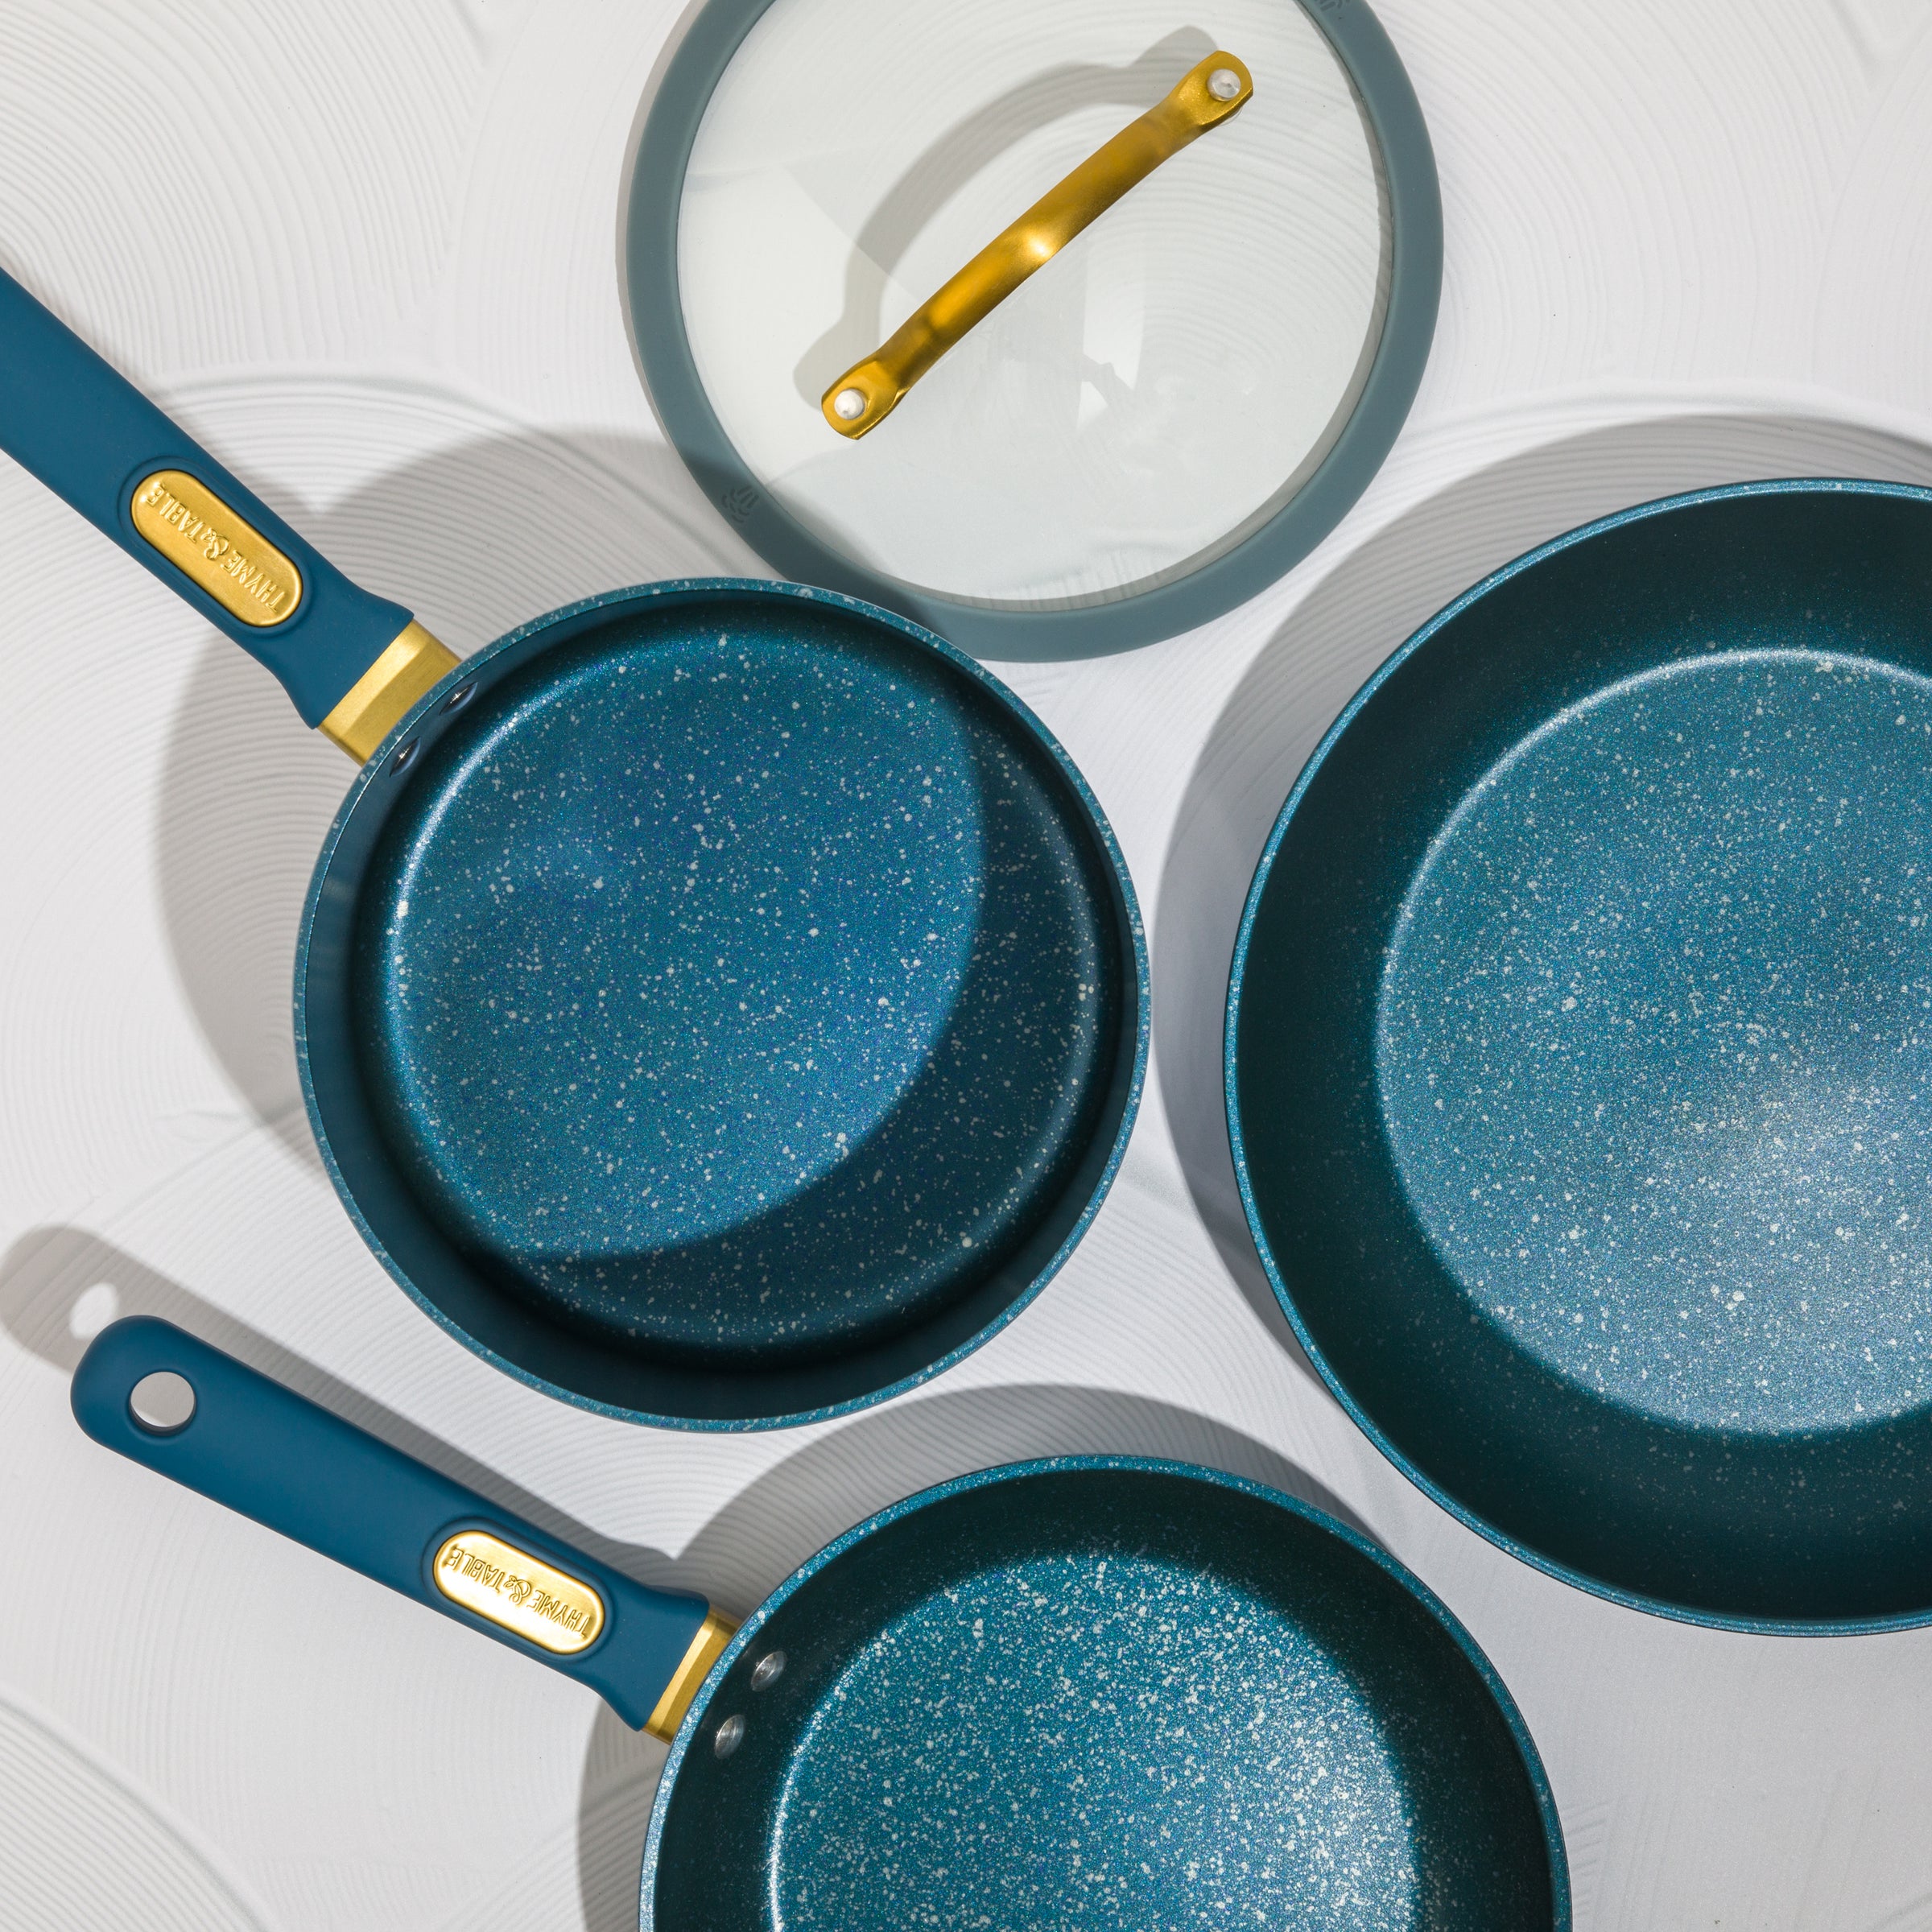 Thyme & Table Nonstick 12-Piece Granite Cookware Set, Blue